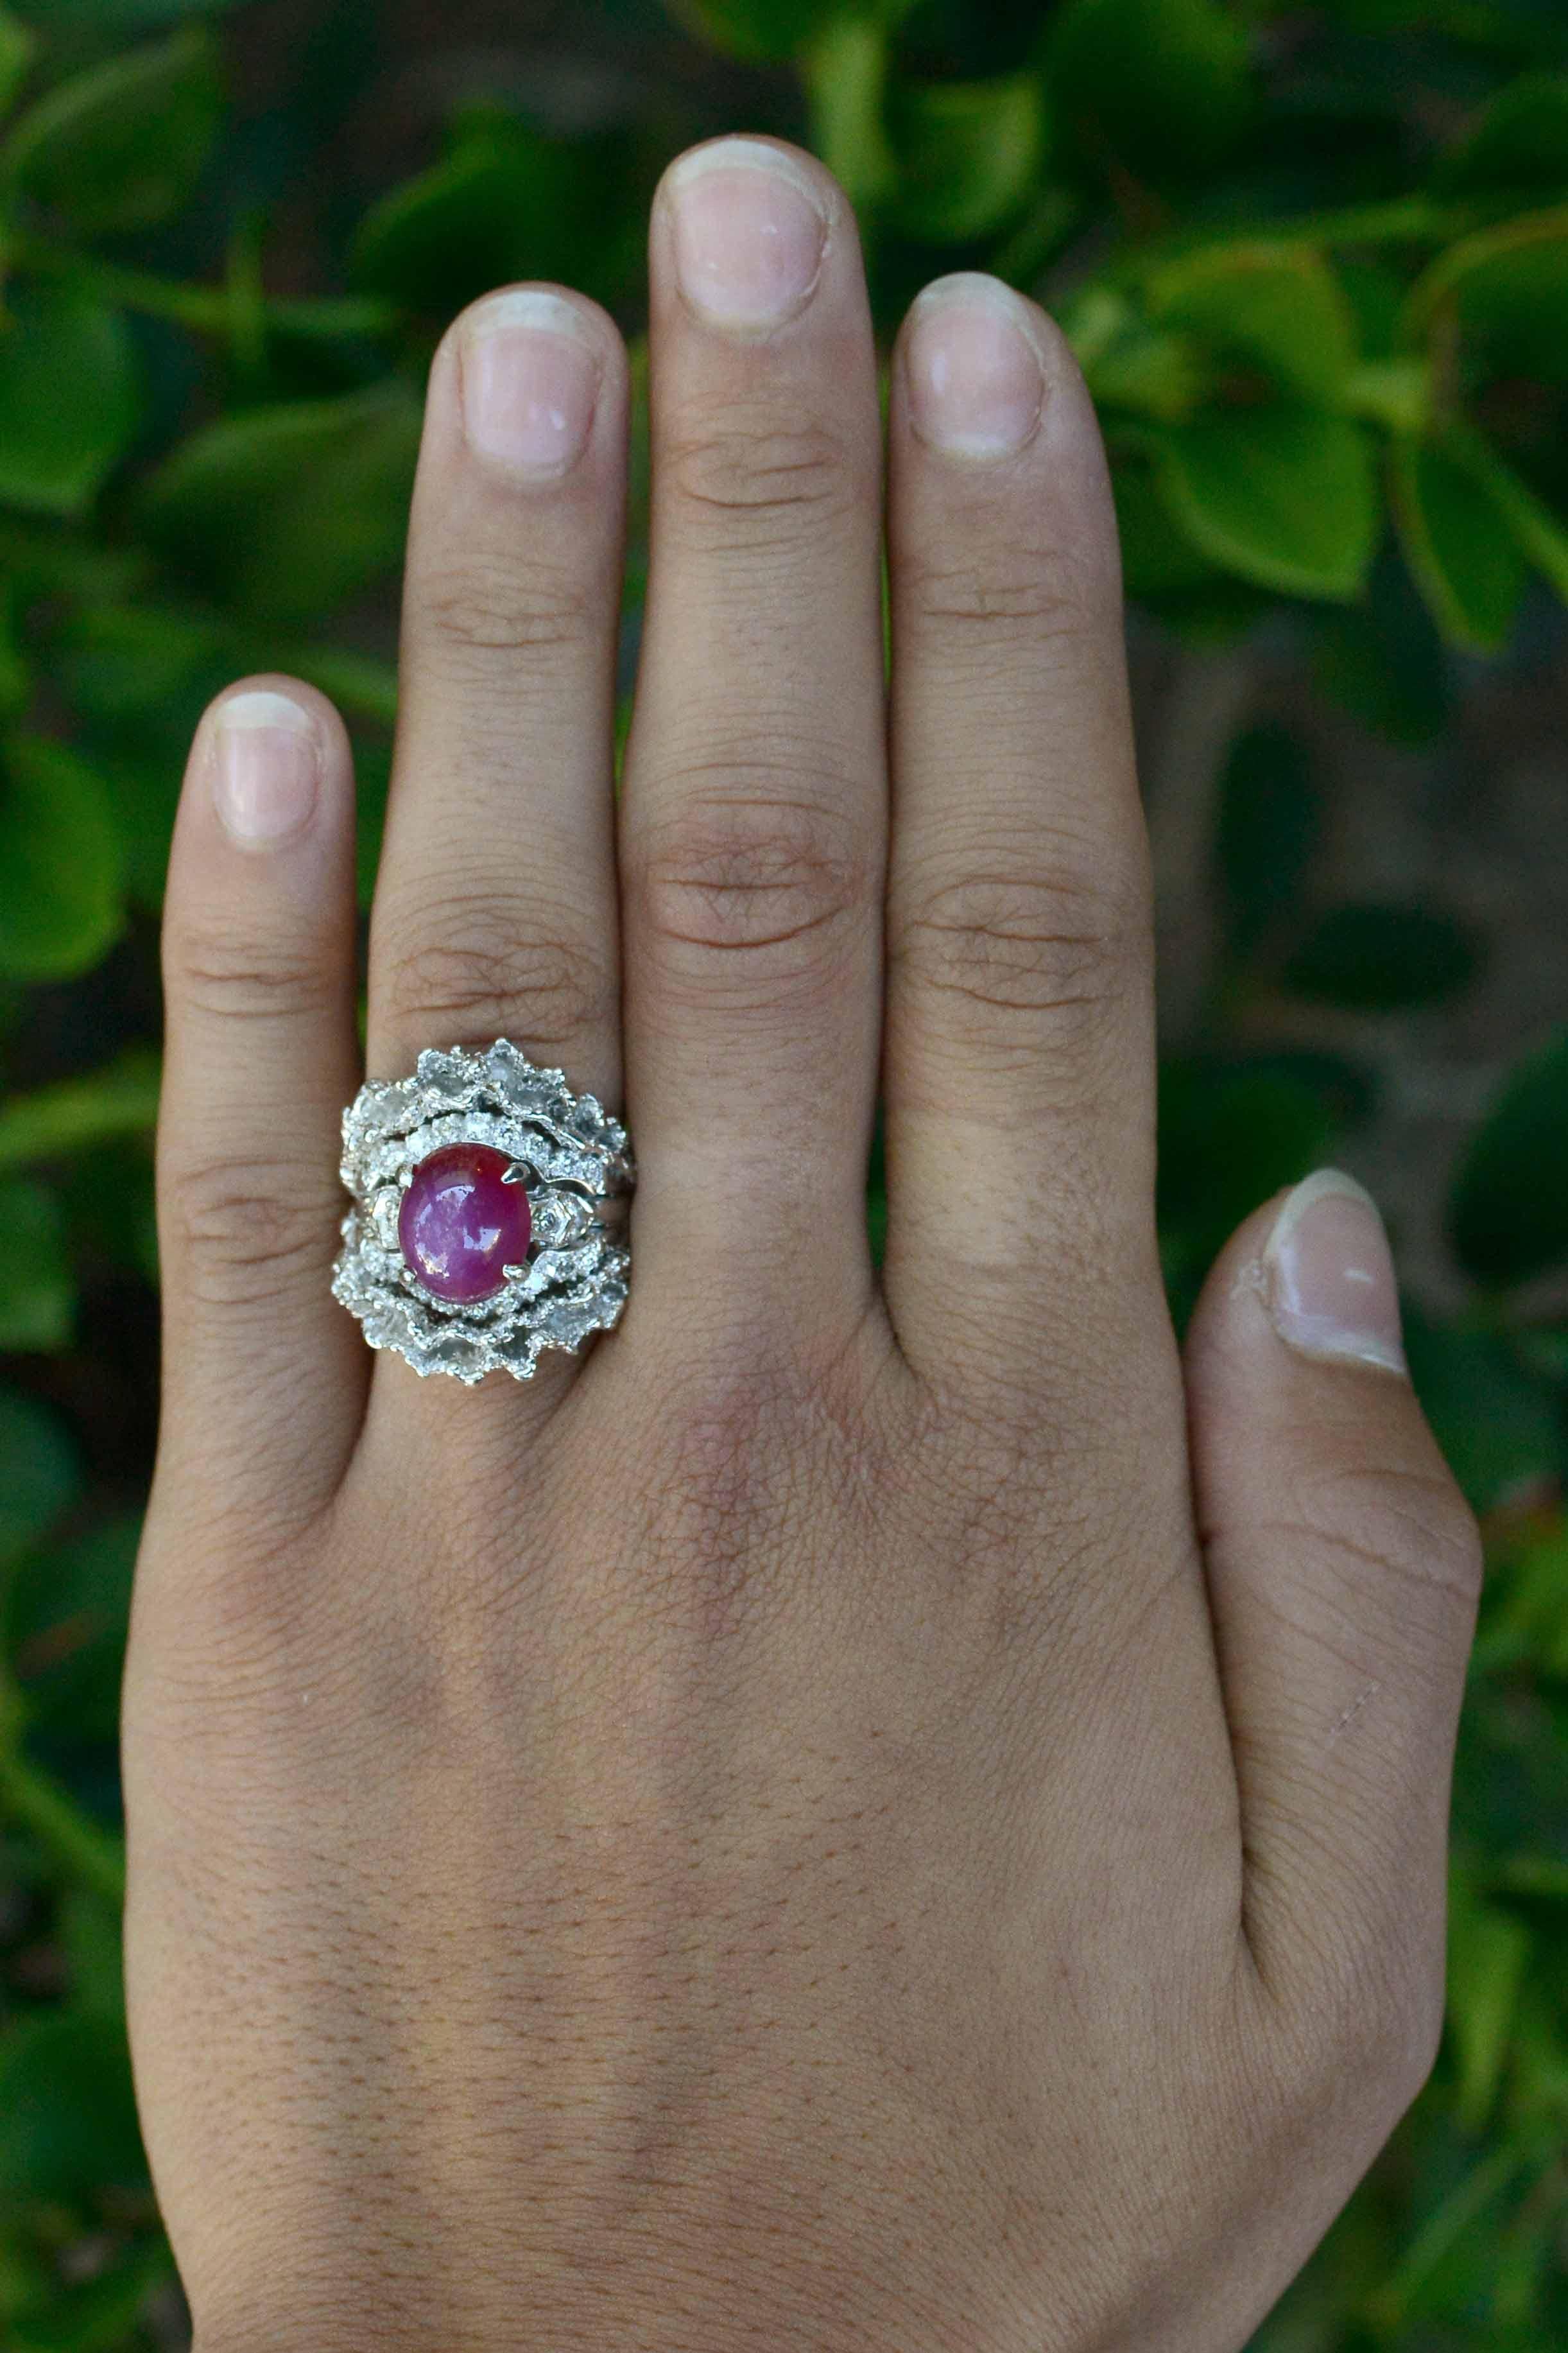 A blazing 5.61 carat star ruby nestled in a dome setting adorned with 24 sparkling diamonds make this Brutalist era cocktail ring really pop. The wide band featuring a ruffled cowl of 14k white gold surrounds a most pleasing, vivid pinkish violet